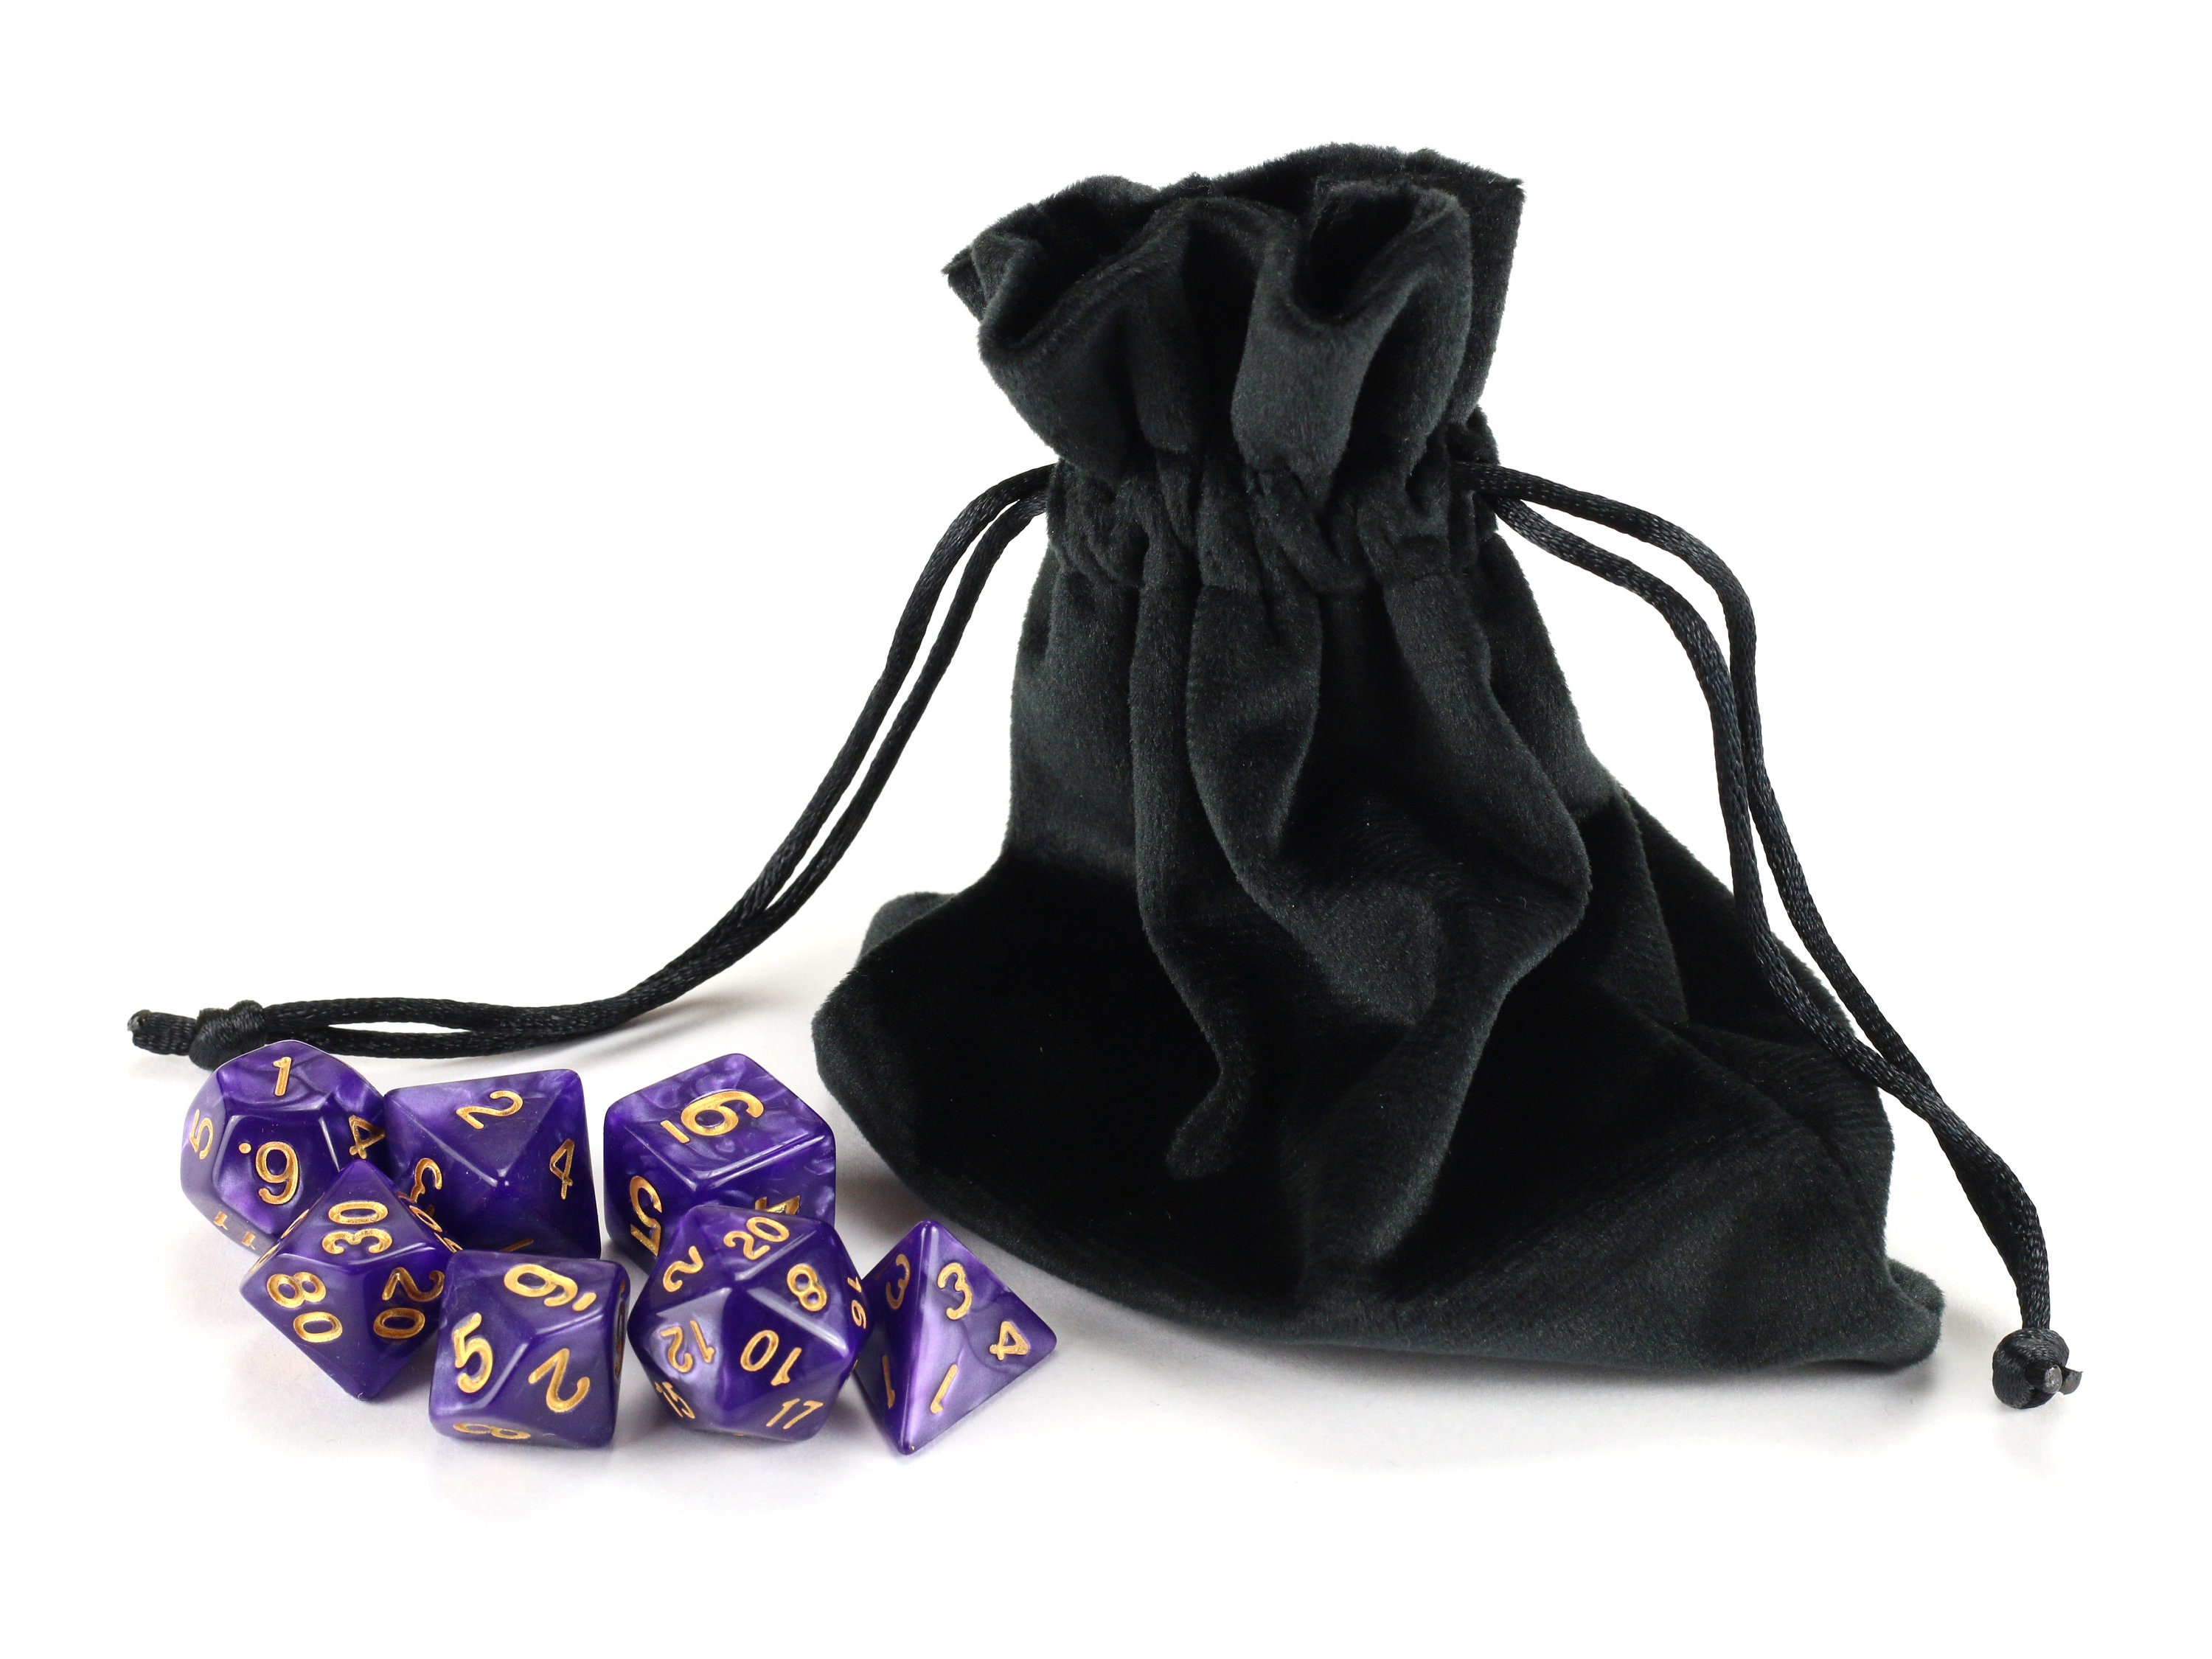 Polyhedral 7-Die Dice Set for Dungeons and Dragons with Black Pouch Transparent Violet 